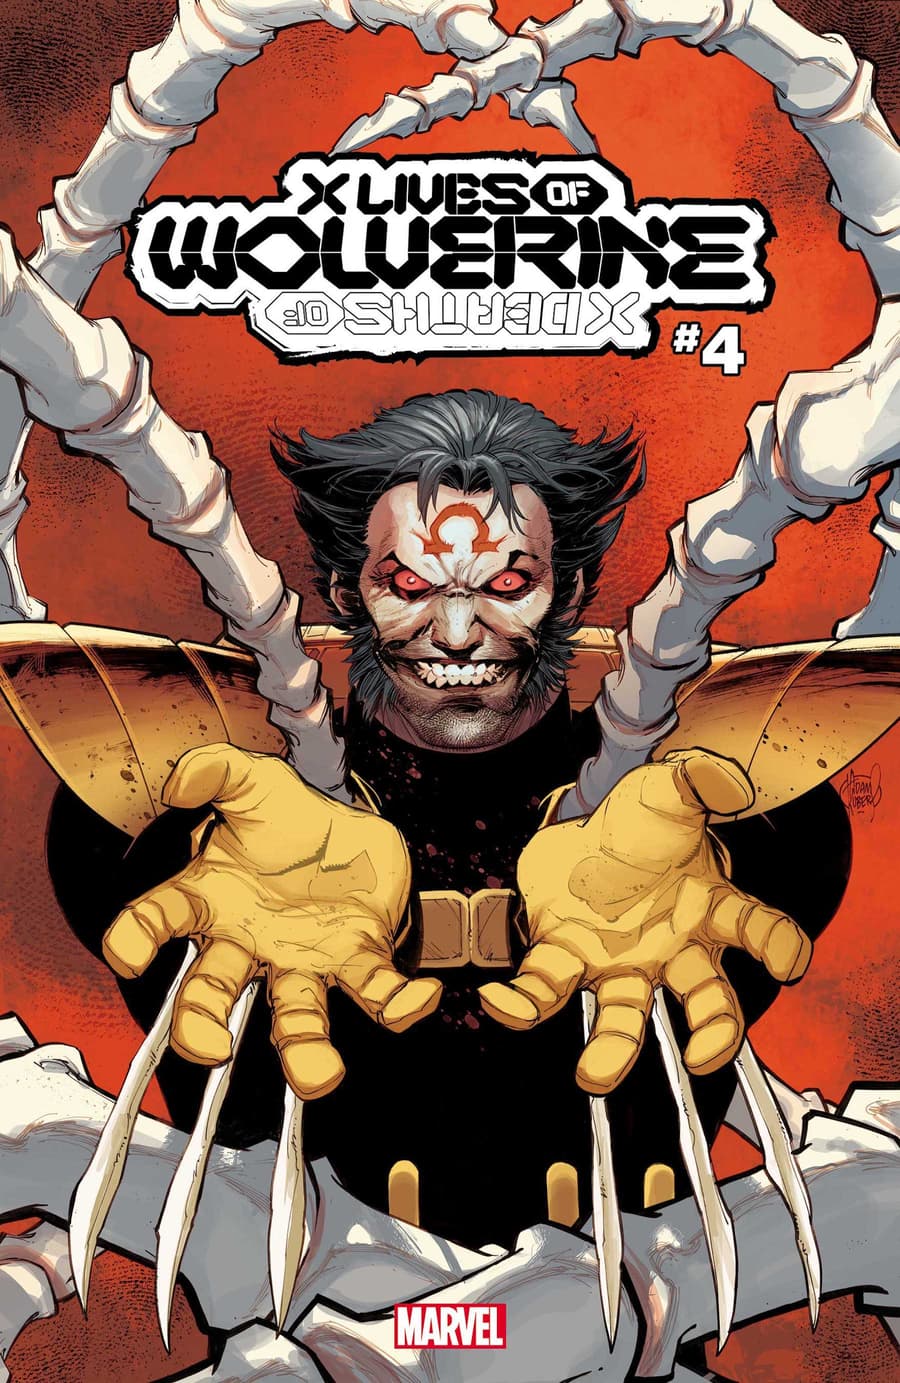 X LIVES OF WOLVERINE #4 cover by Adam Kubert